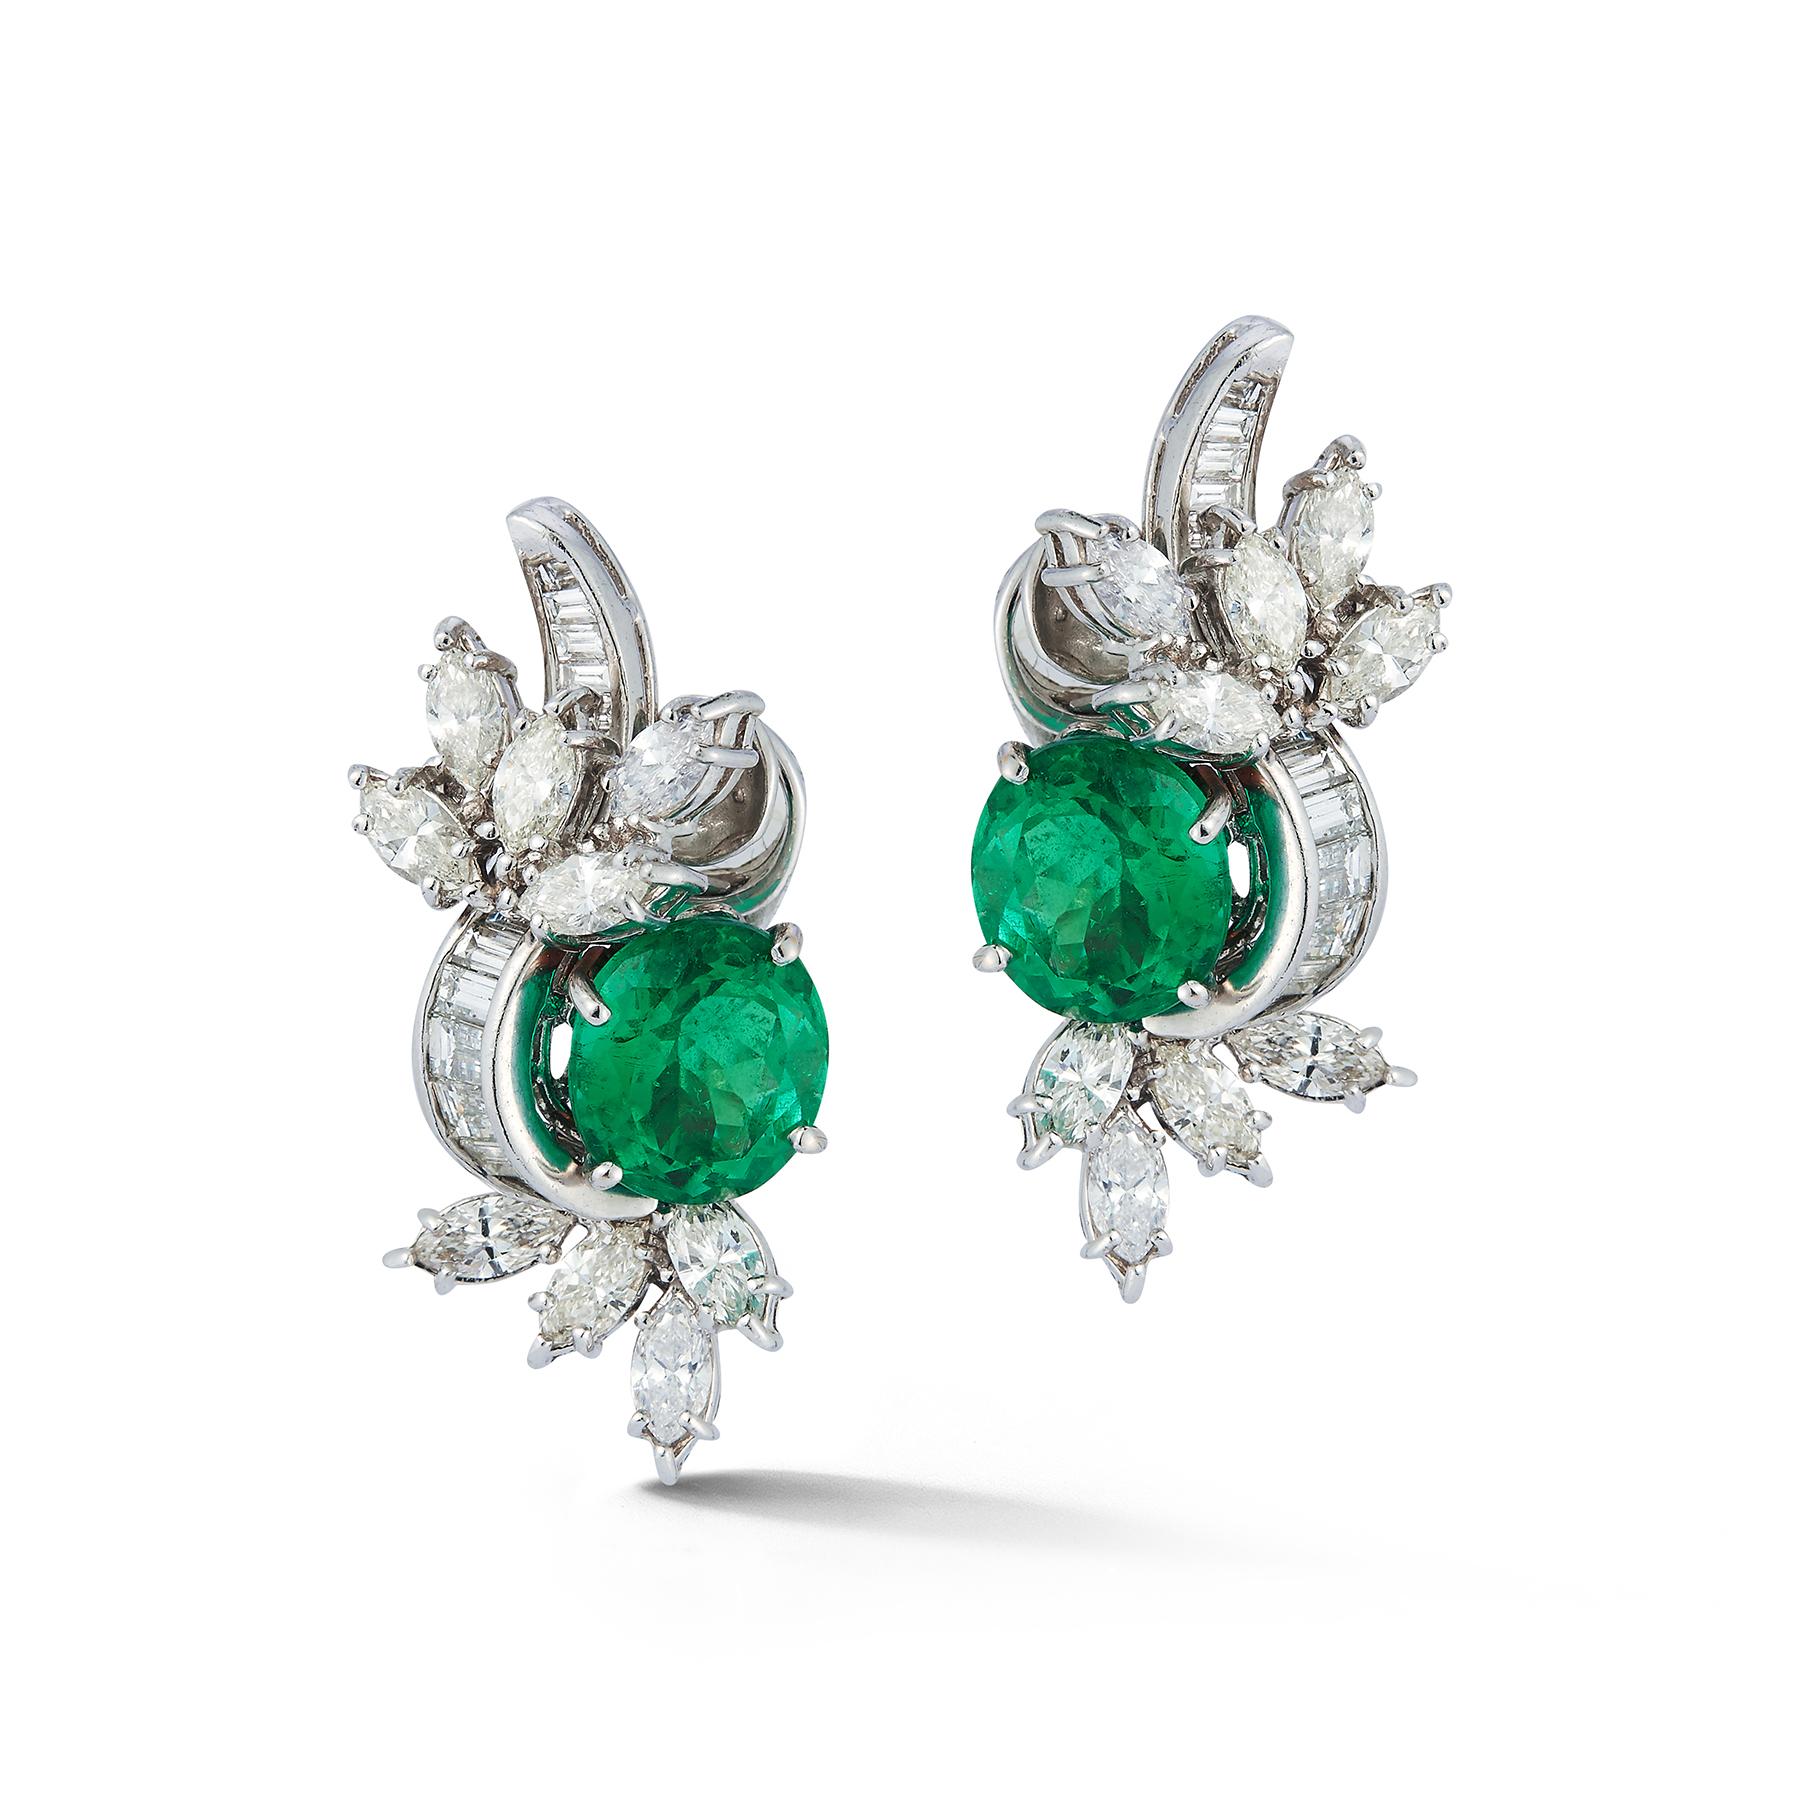 Emerald & Diamond Flower Earrings, 2 round cut emeralds approximately 6.55 cts, 18 marquise cut diamonds approximately 3.09 cts & 26 tapered baguette cut diamonds approximately .90 cts set in platinum.

Measurements: 1